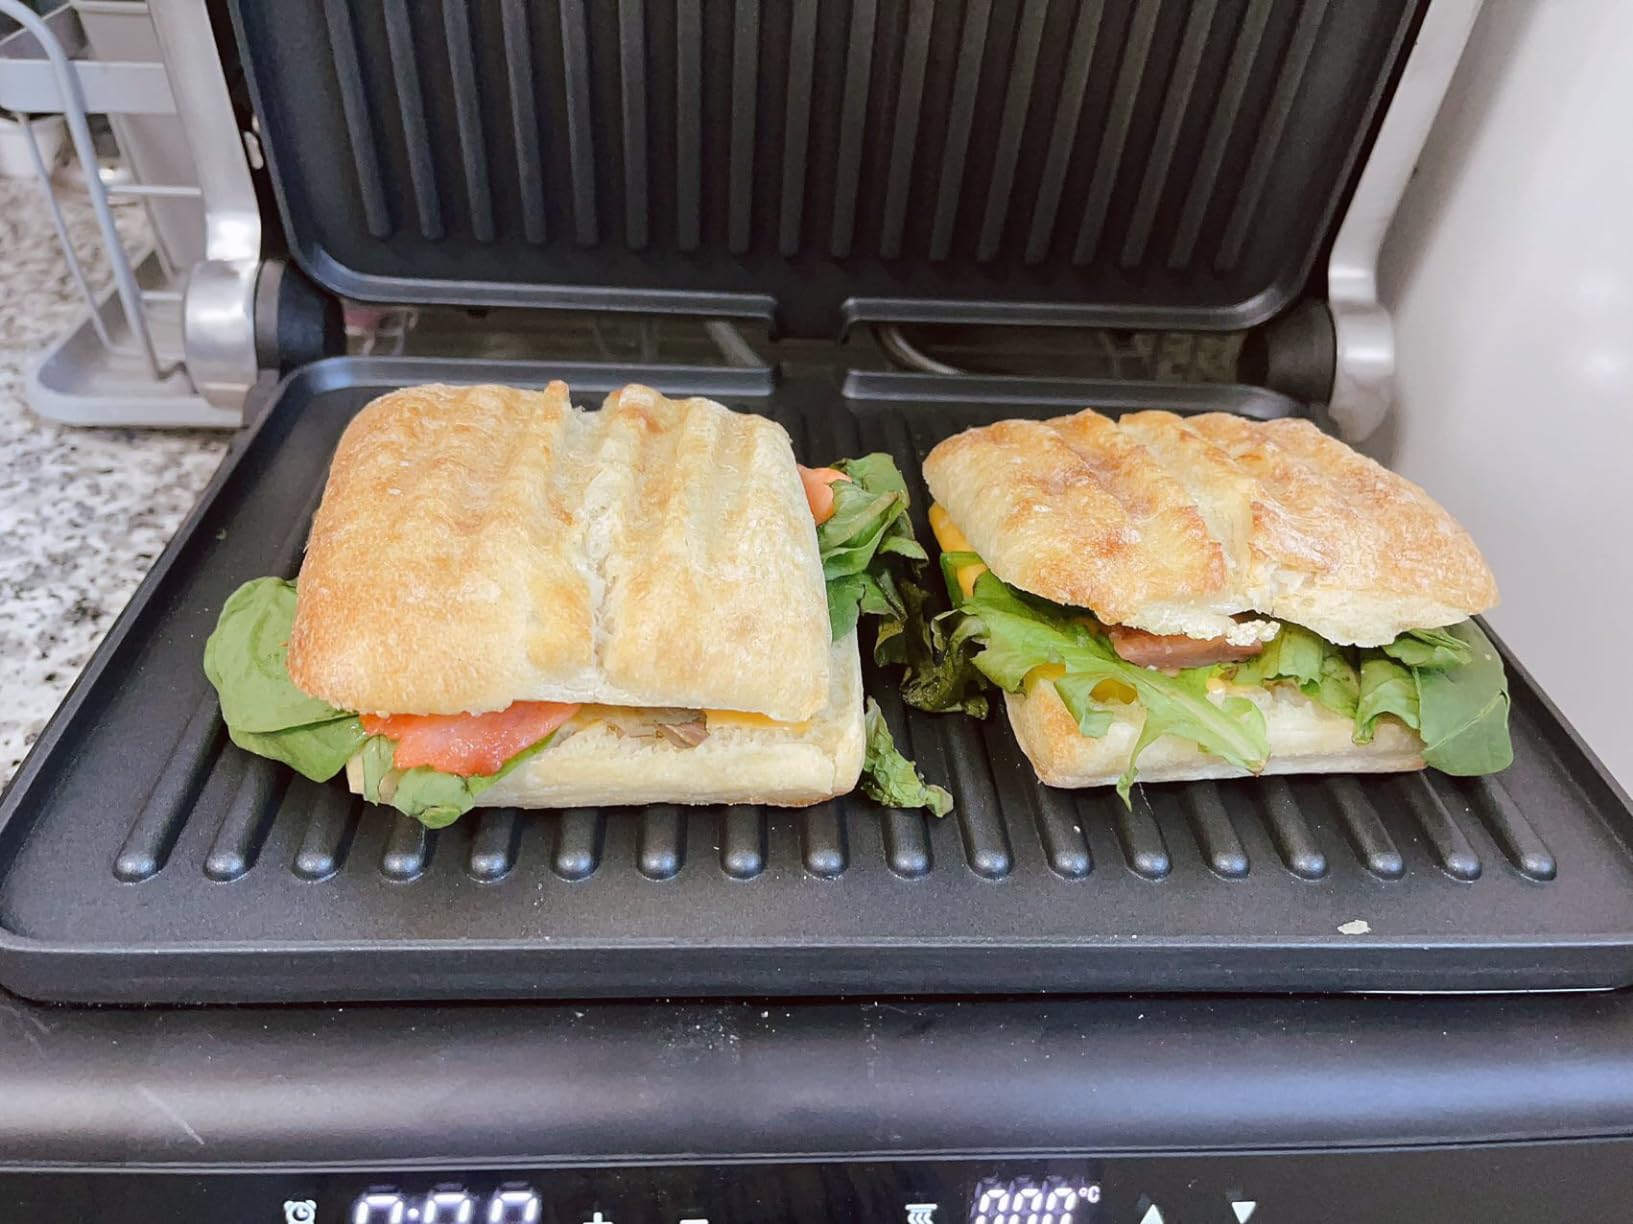 Costway Electric Panini Press Grill Sandwich Maker with LED Display &  Removable Drip Tray